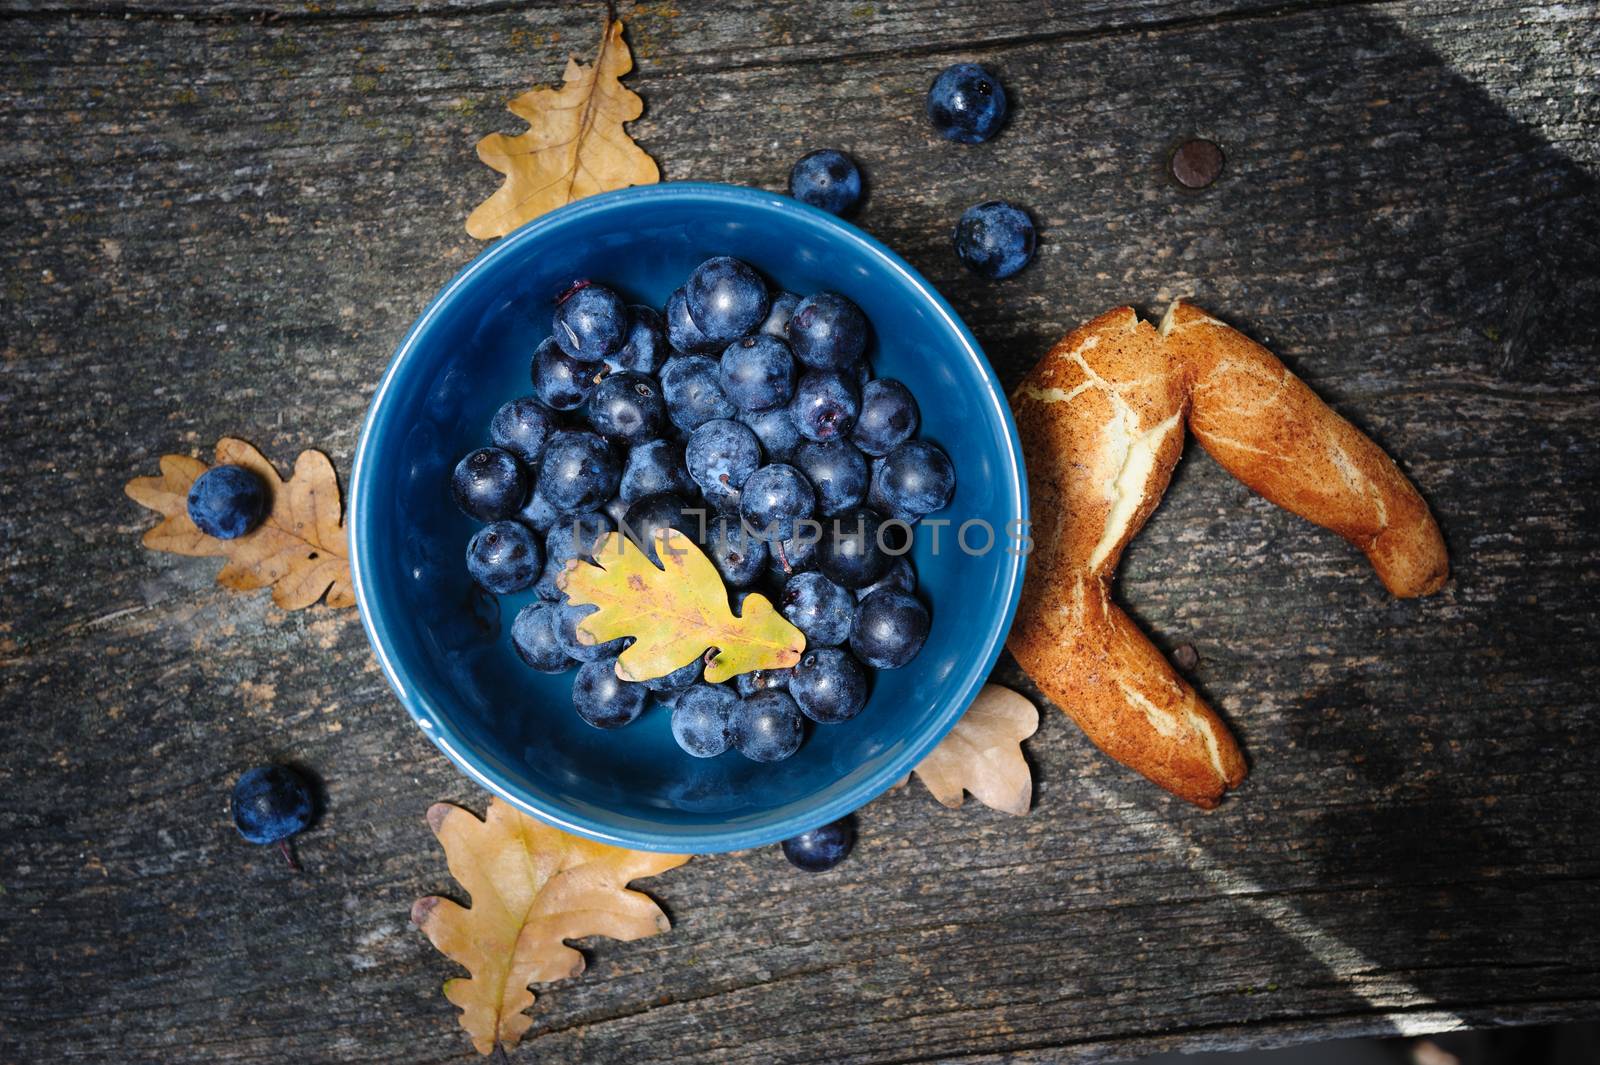 Still life with blackthorn and bagel by starush